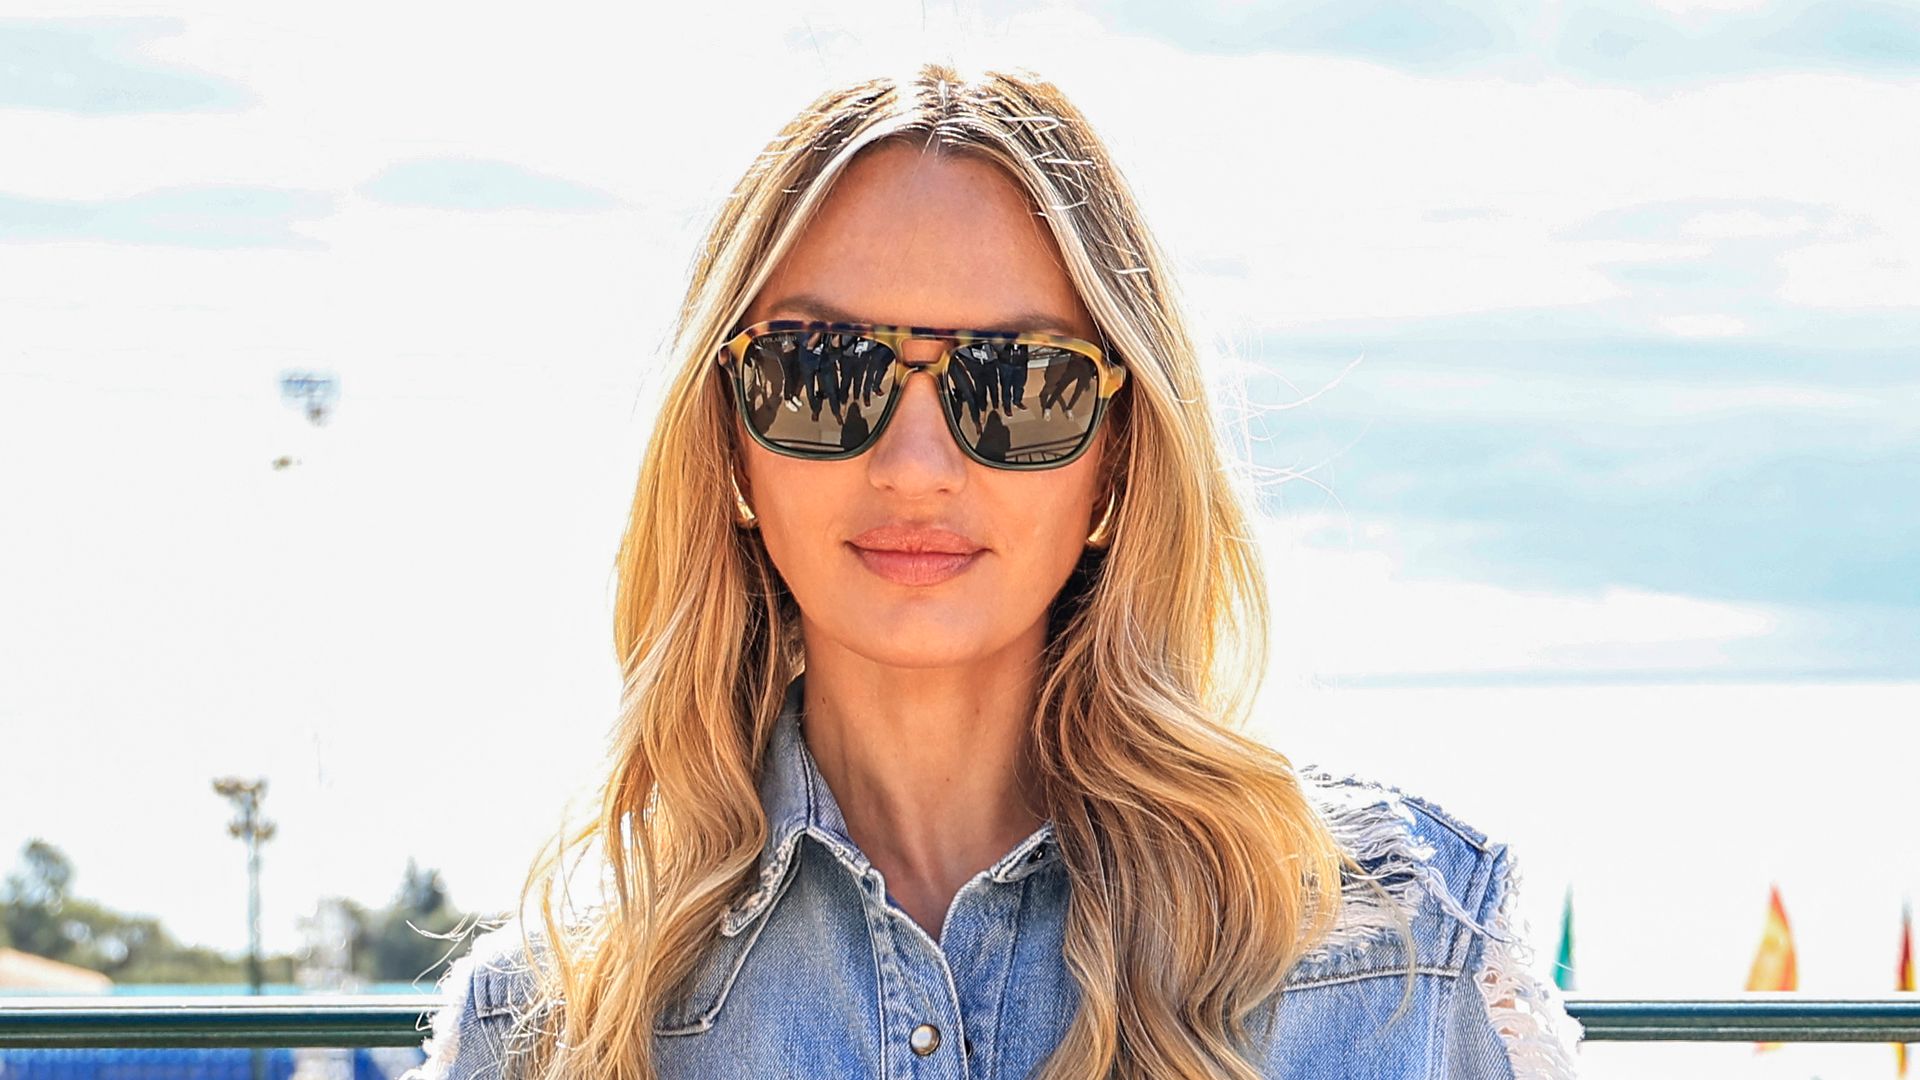 Candice Swanepoel's tennis spectator outfit is a lesson in cool-girl courtside dressing